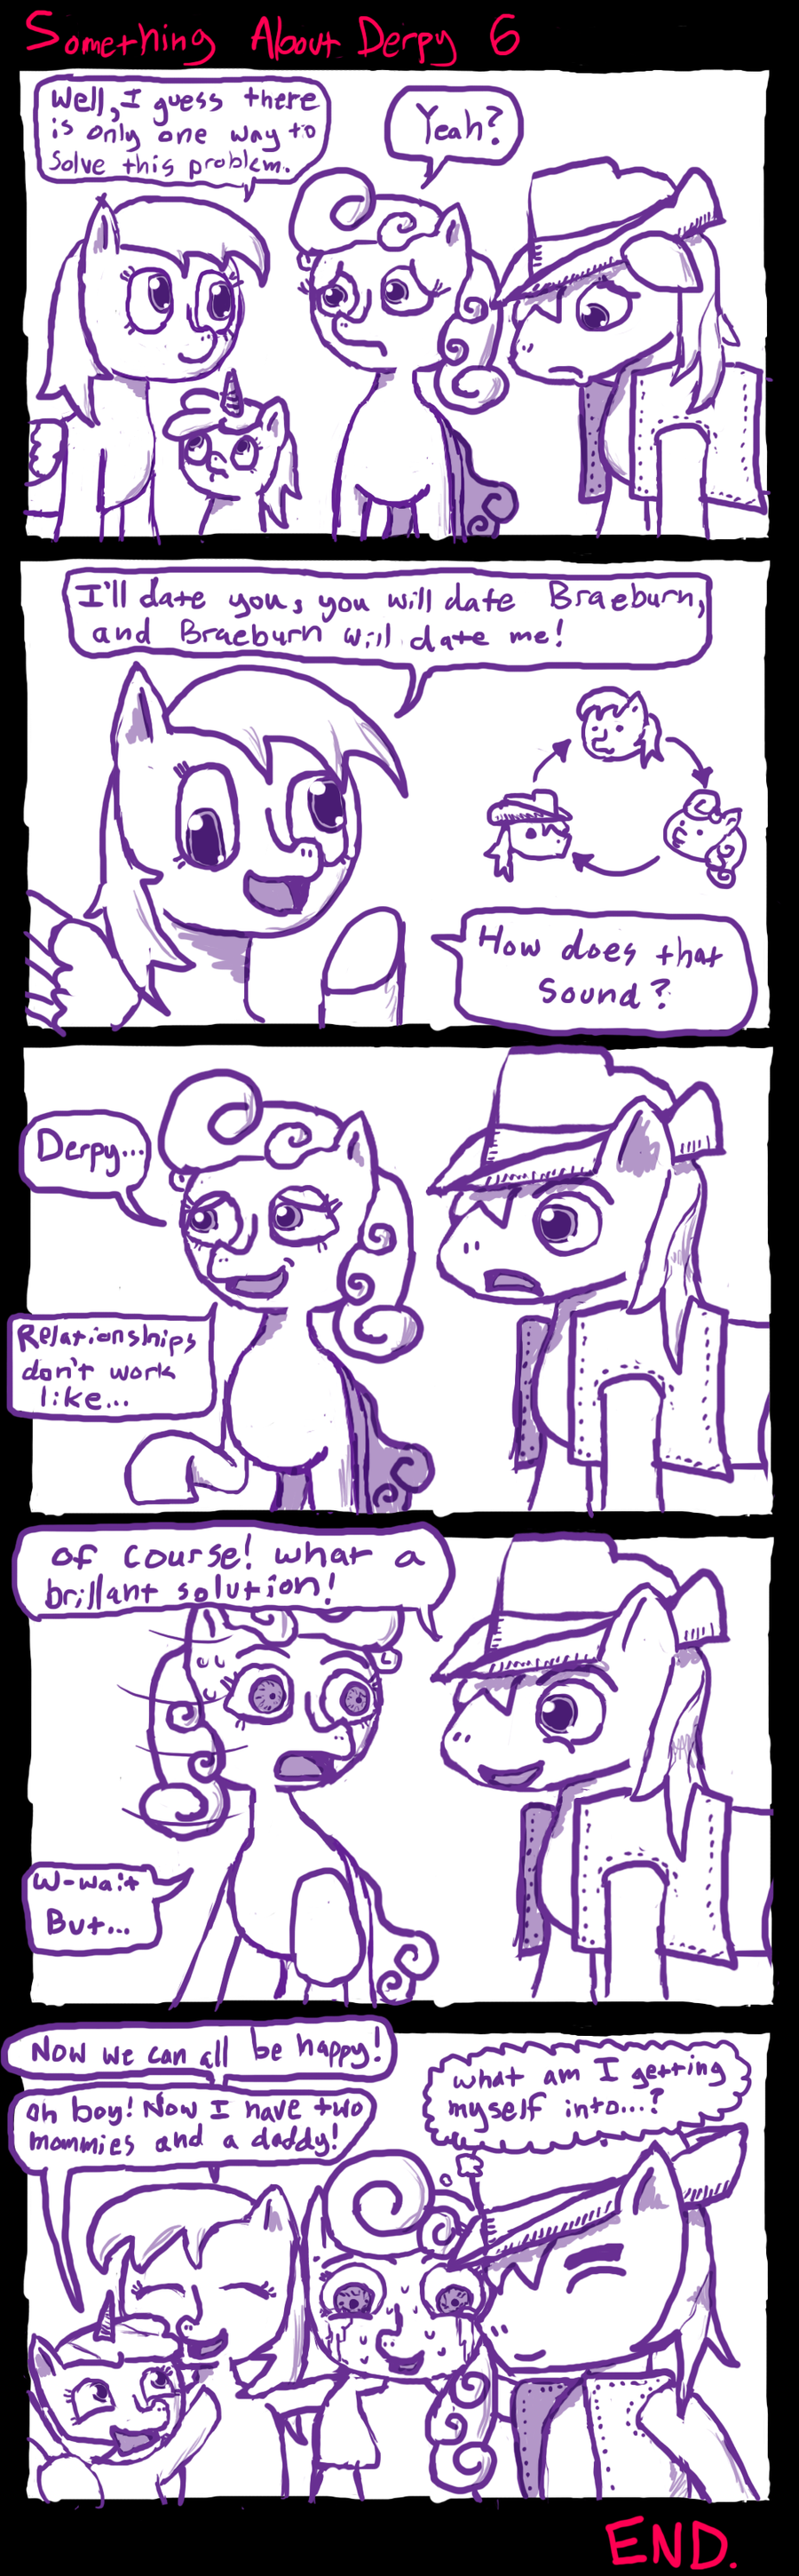 something_about_derpy_6_by_ficficponyfic-d4fs3i5.png